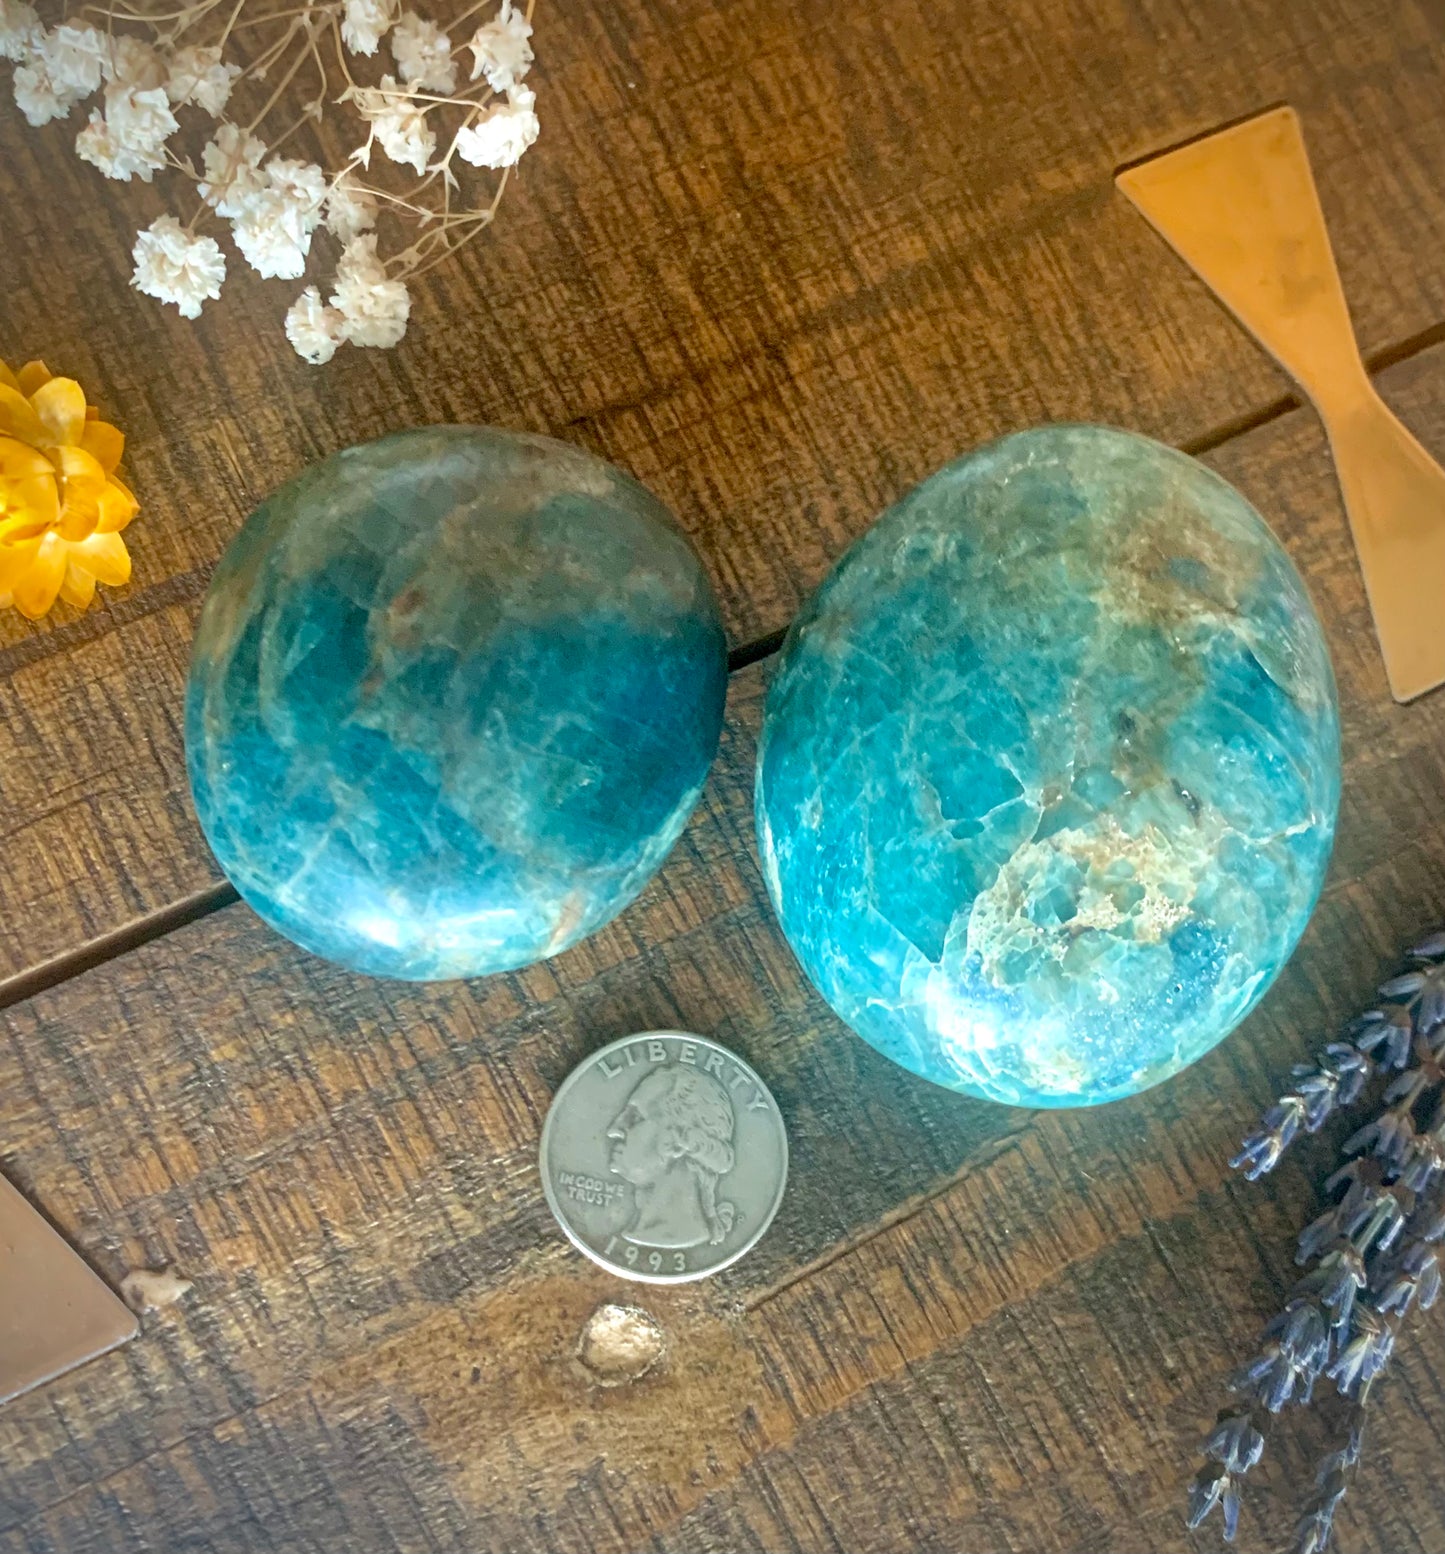 Comparison of a small blue apatite palm stone and a larger one next to a US quarter for reference.